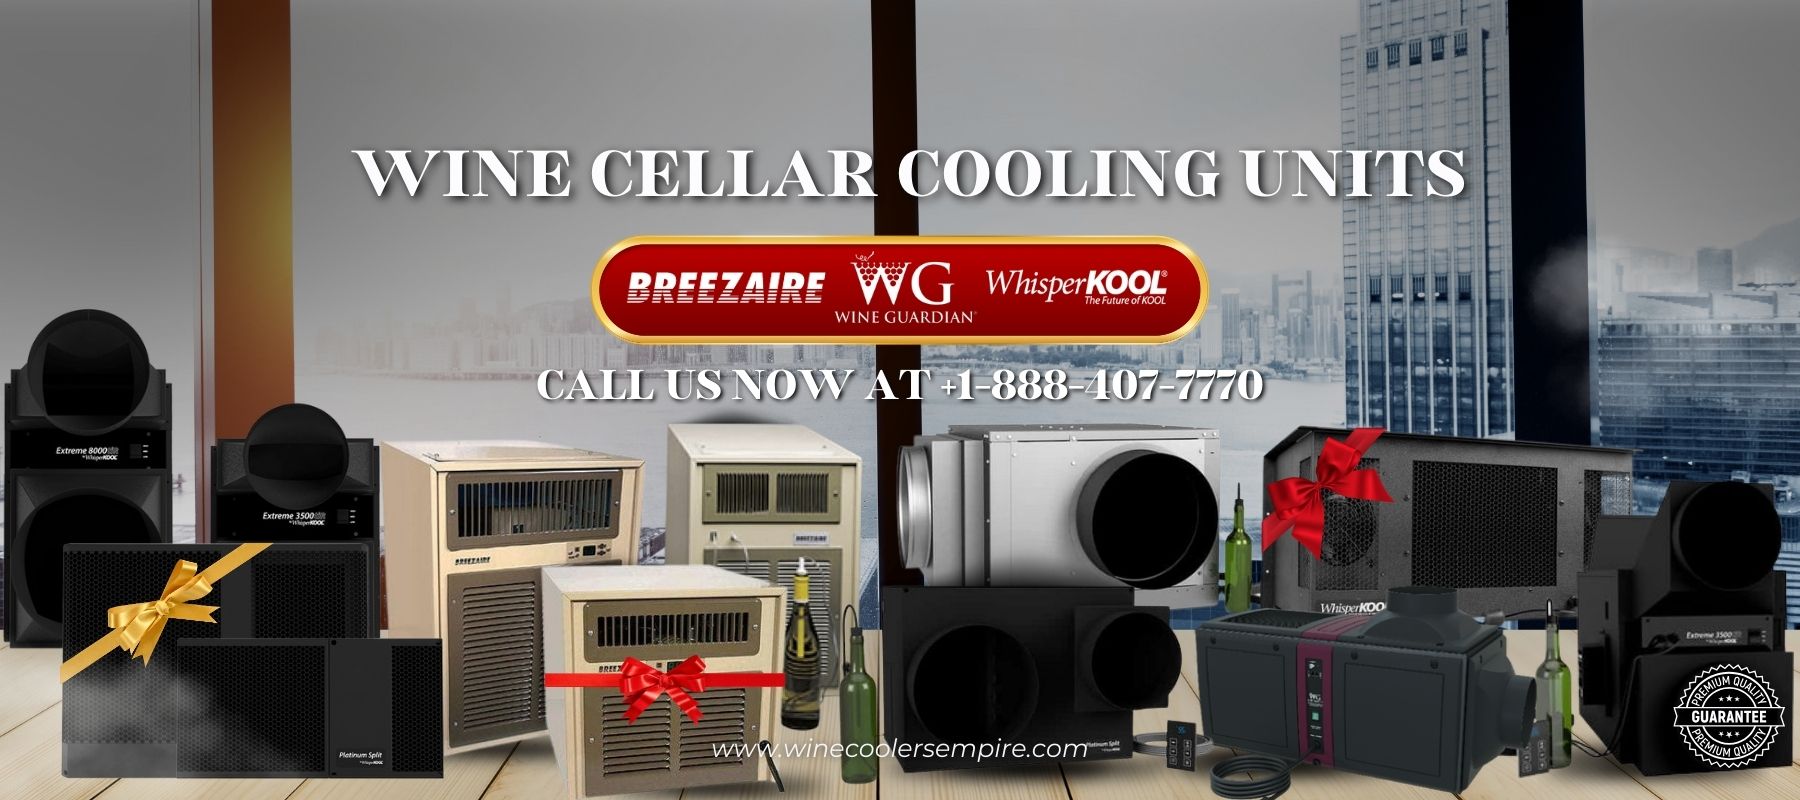 wine cellar cooling units - wine coolers empire